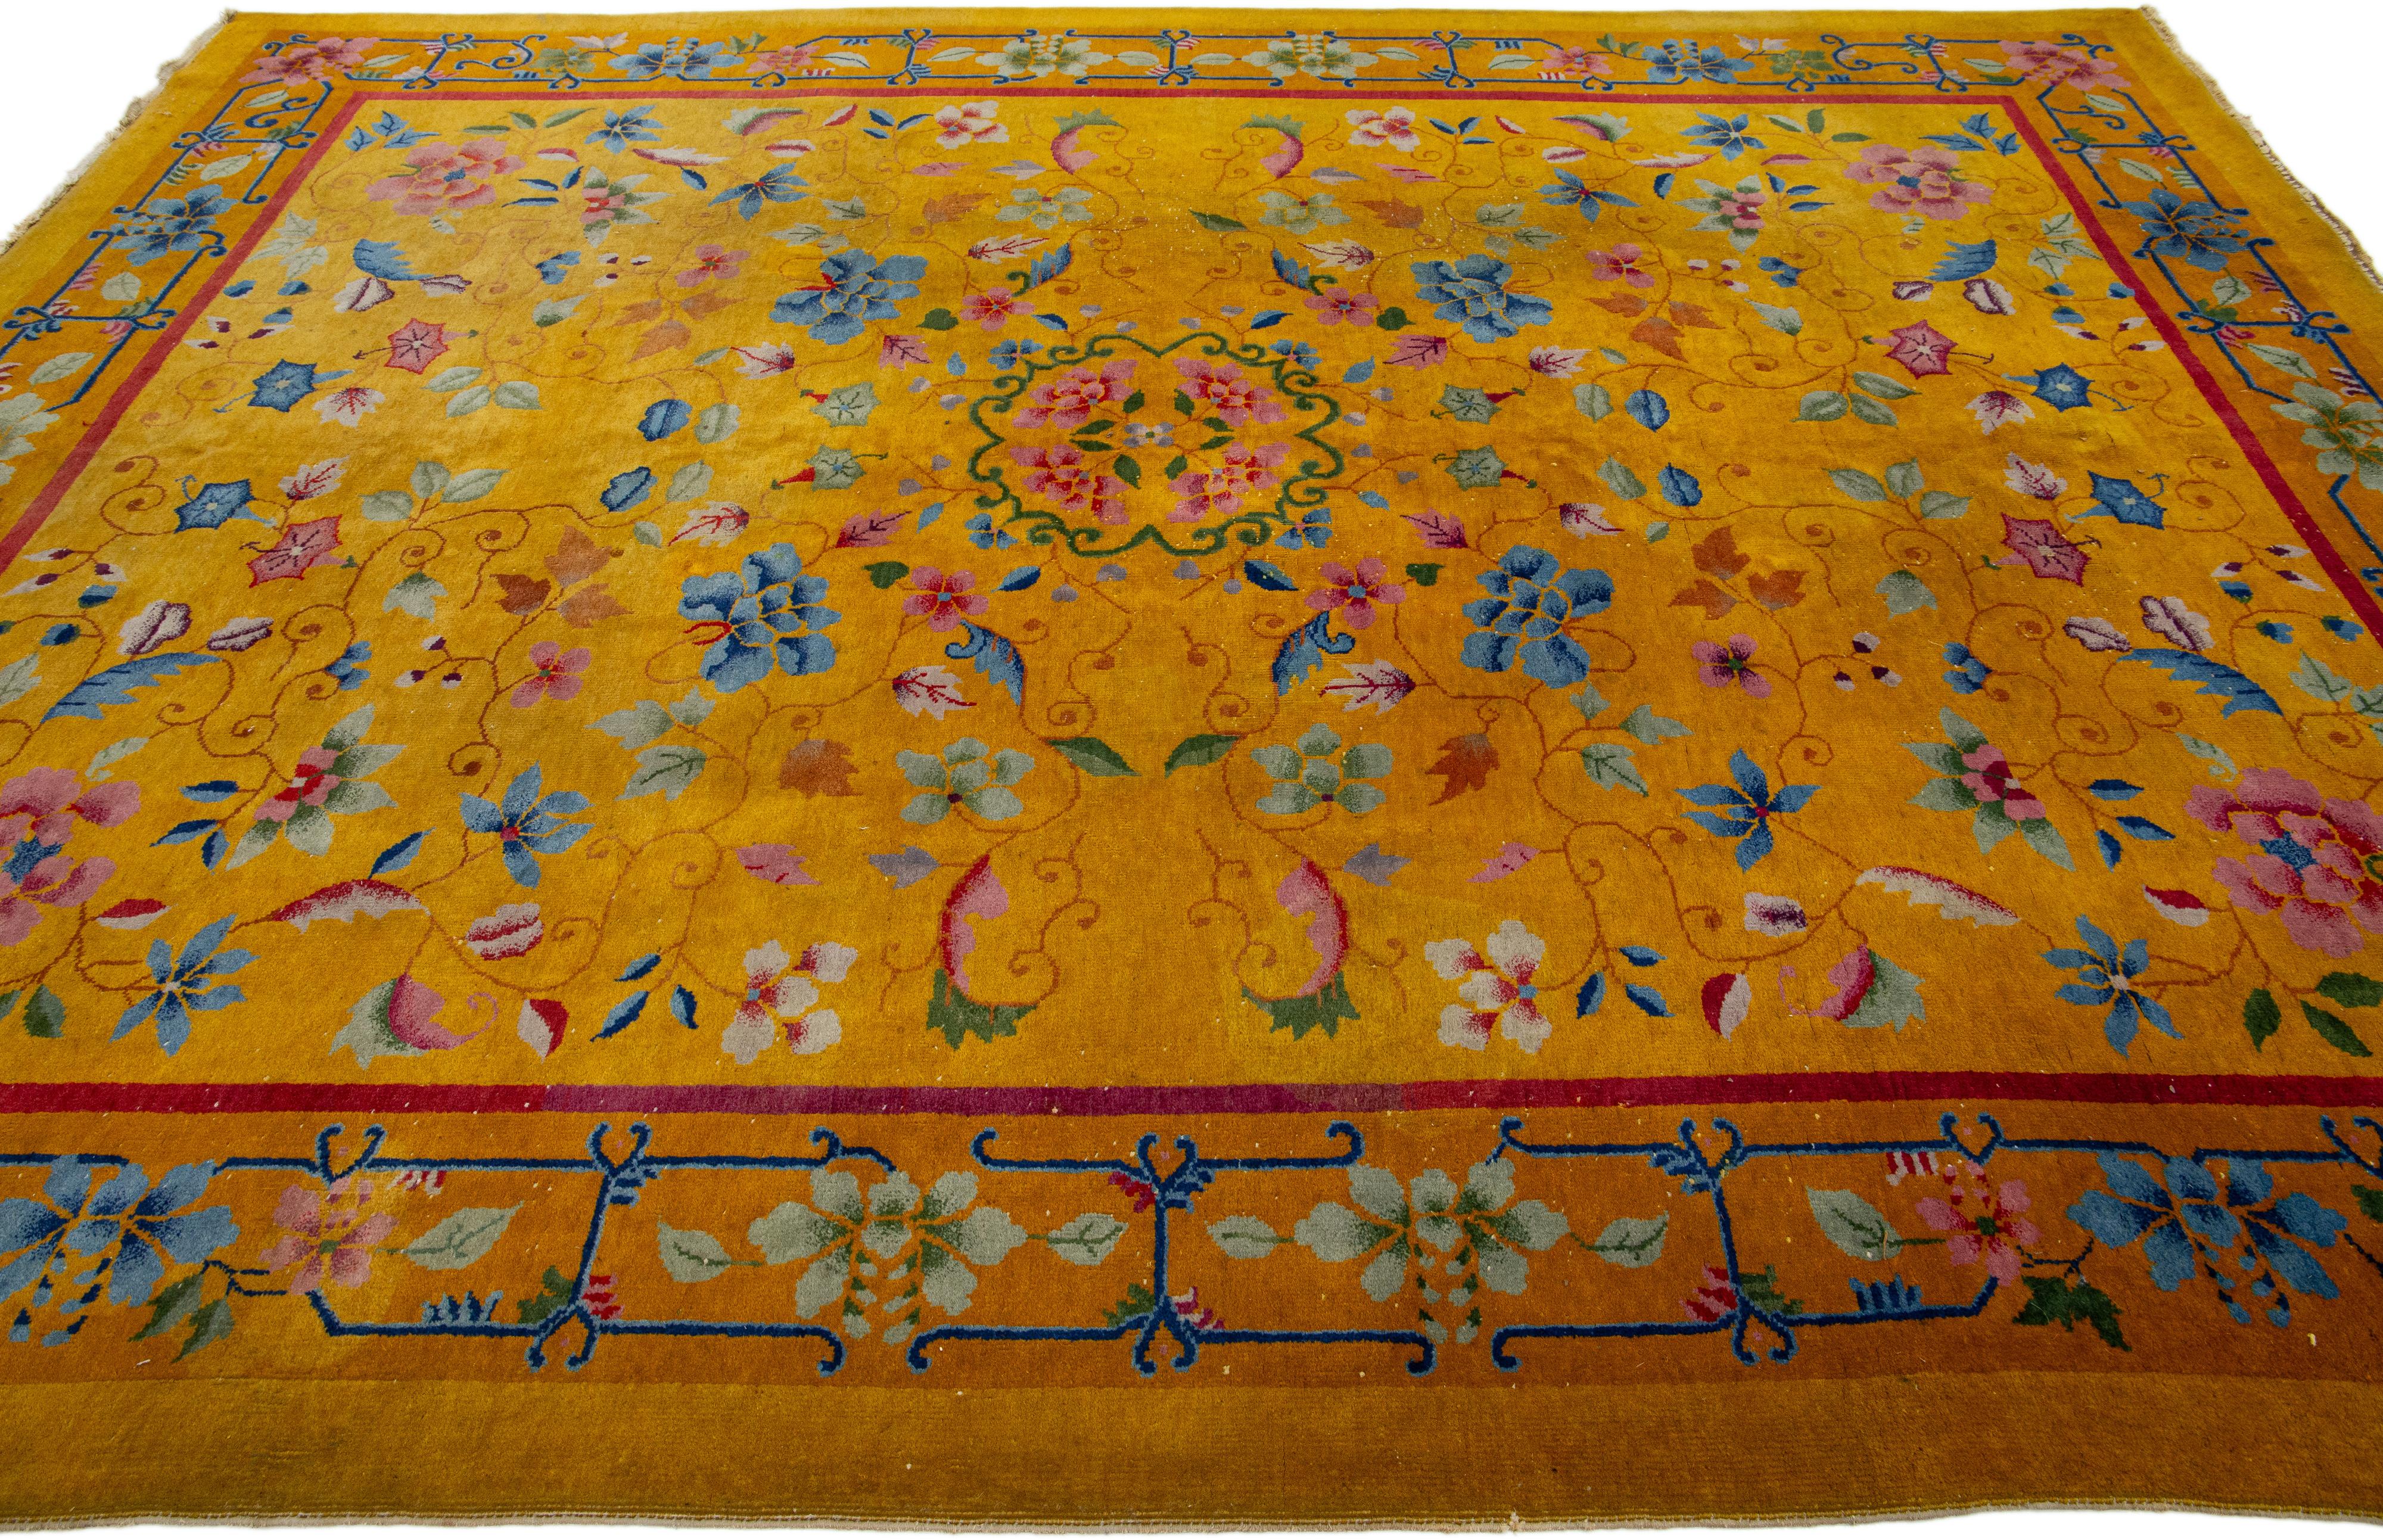 Hand-Knotted Antique 1920s Chinese Art Deco Rug In Goldenrod with Floral Motif For Sale